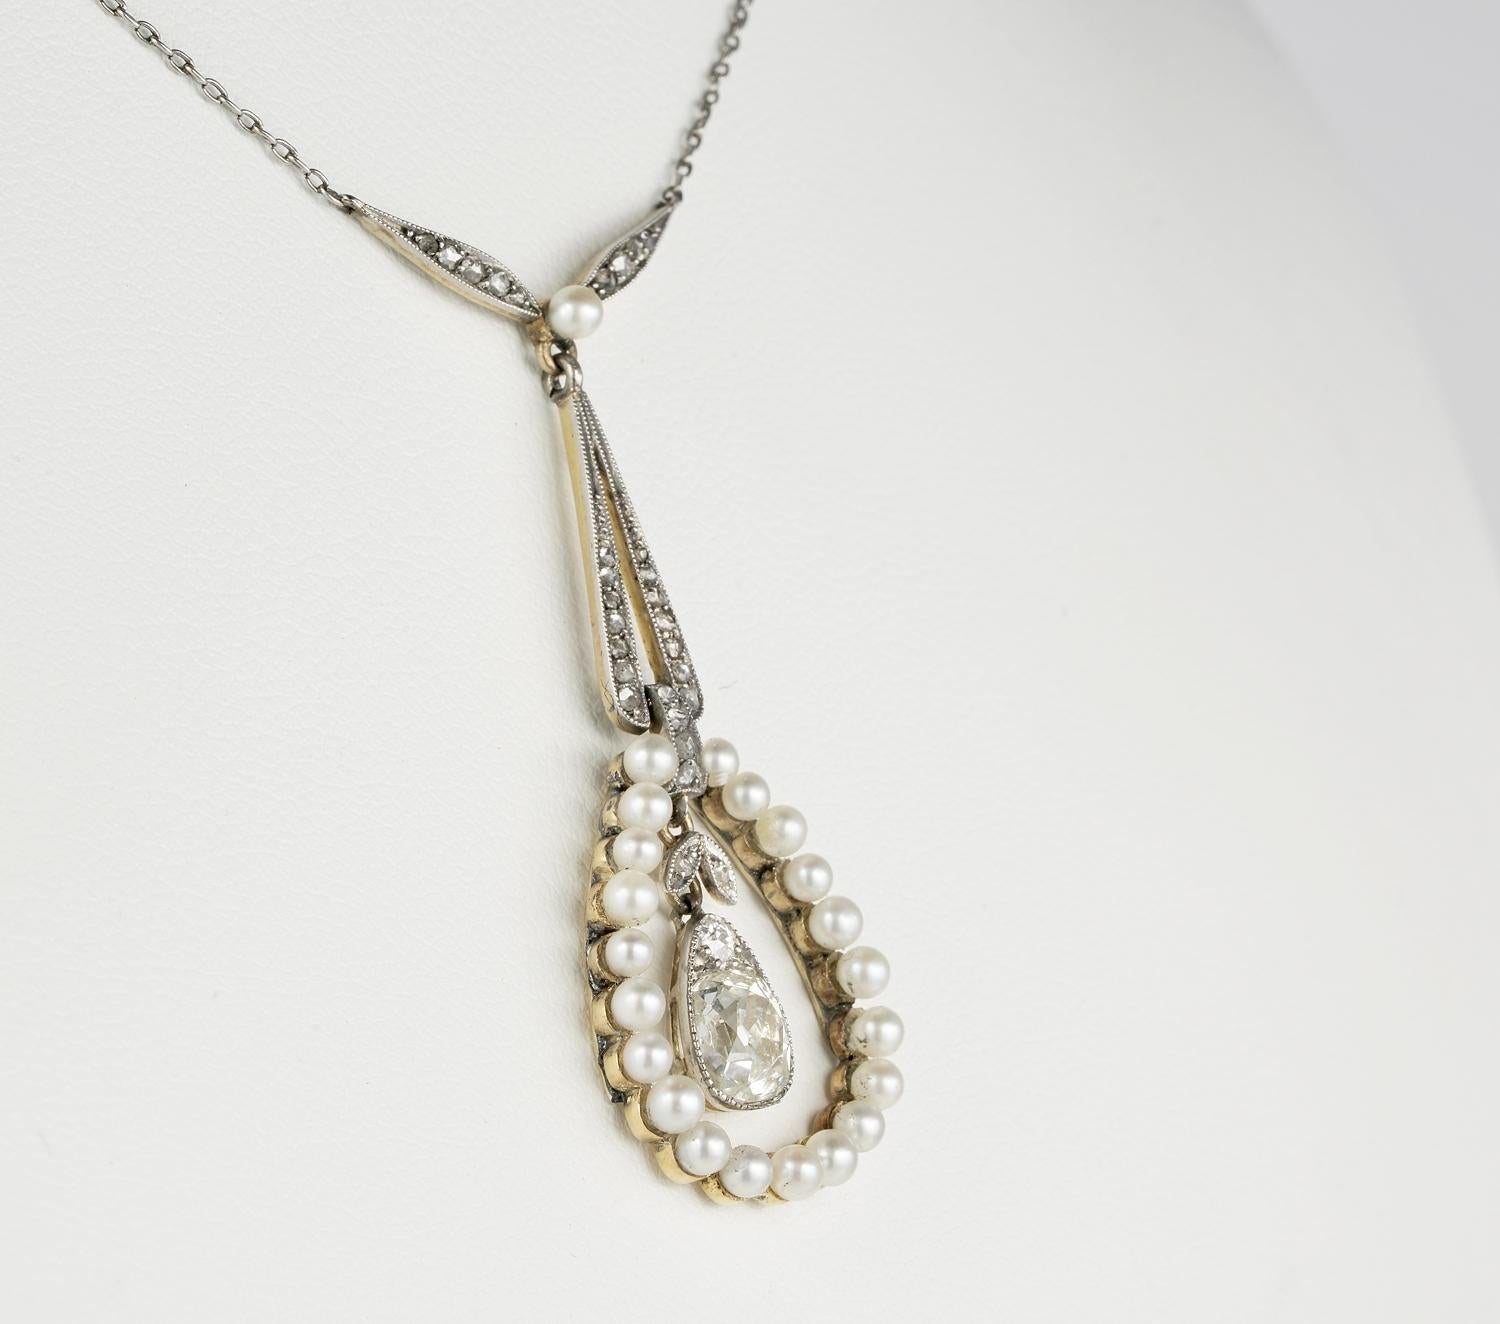 Elegance at Peak

A simply, divine, Edwardian period Diamond drop pendant unusually complemented with natural Pearls instead of the more usual Diamond frame

Charming and elegant in design, consists in a delicately designed links connections, set